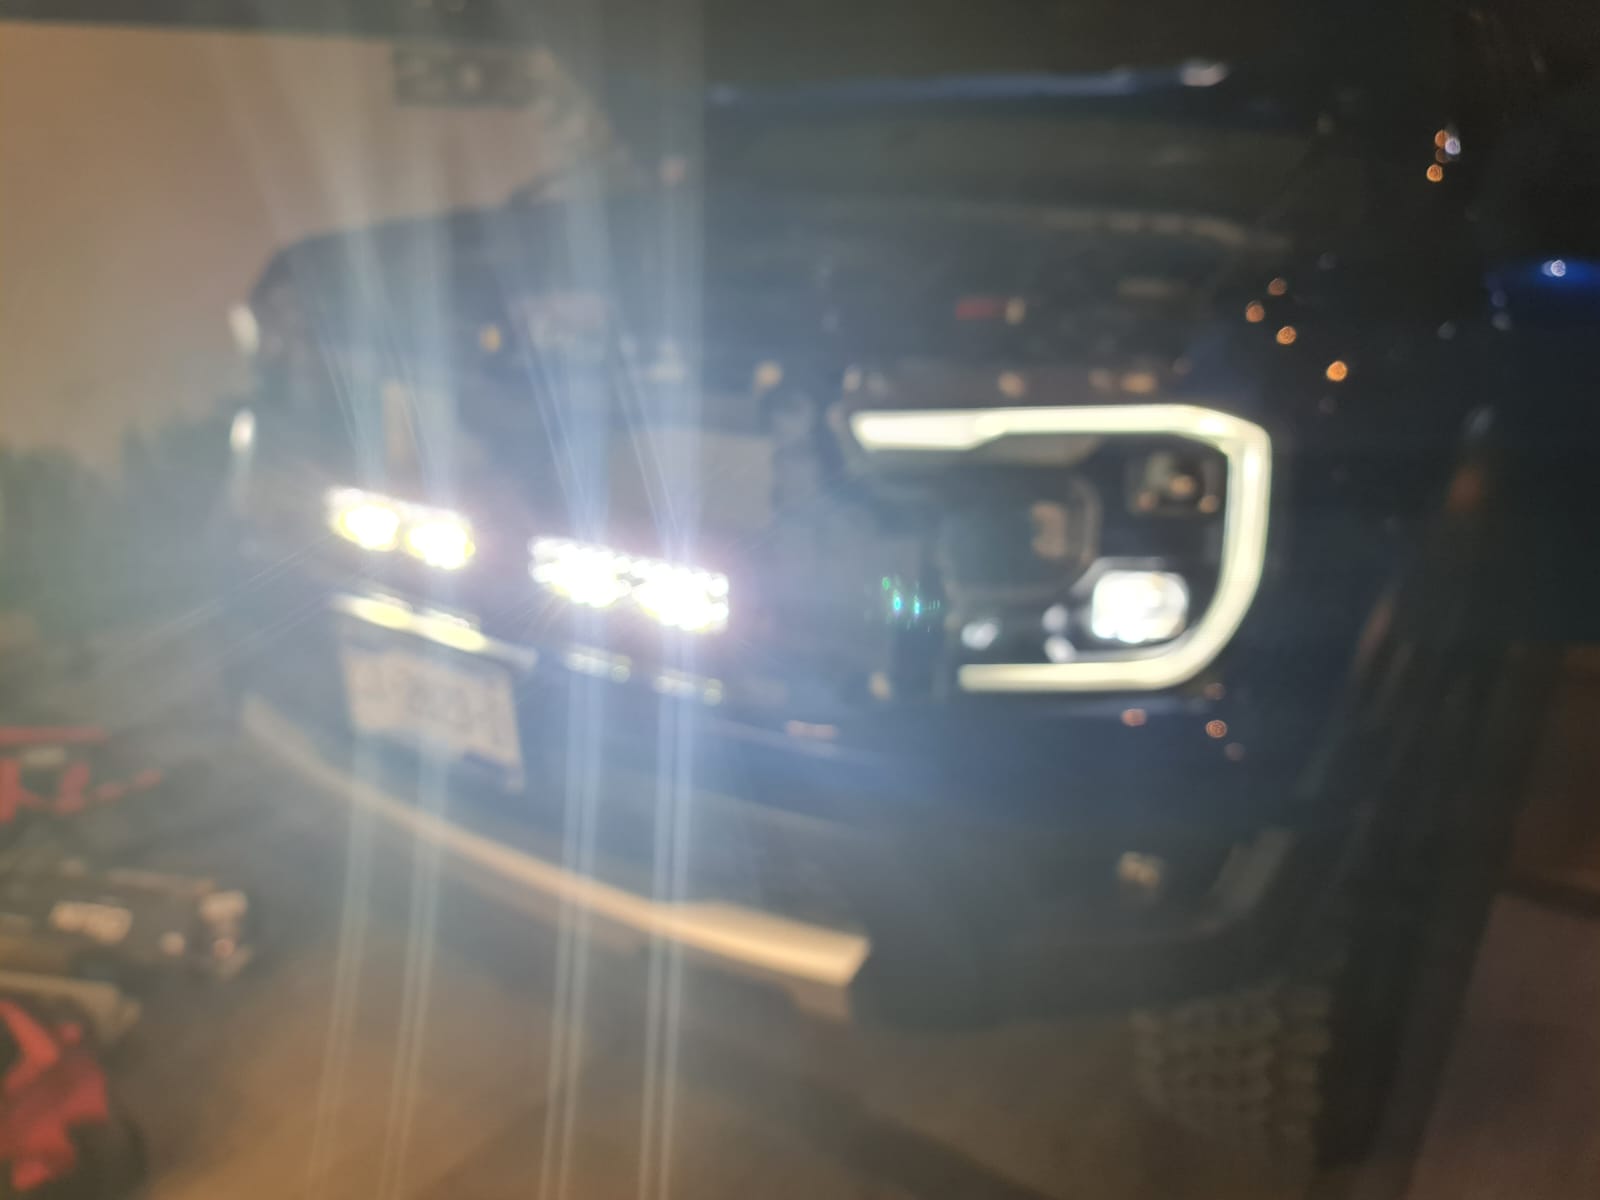 Ford Ranger Who makes Raptor lights for the grill? WhatsApp Image 2023-07-17 at 6.29.56 AM